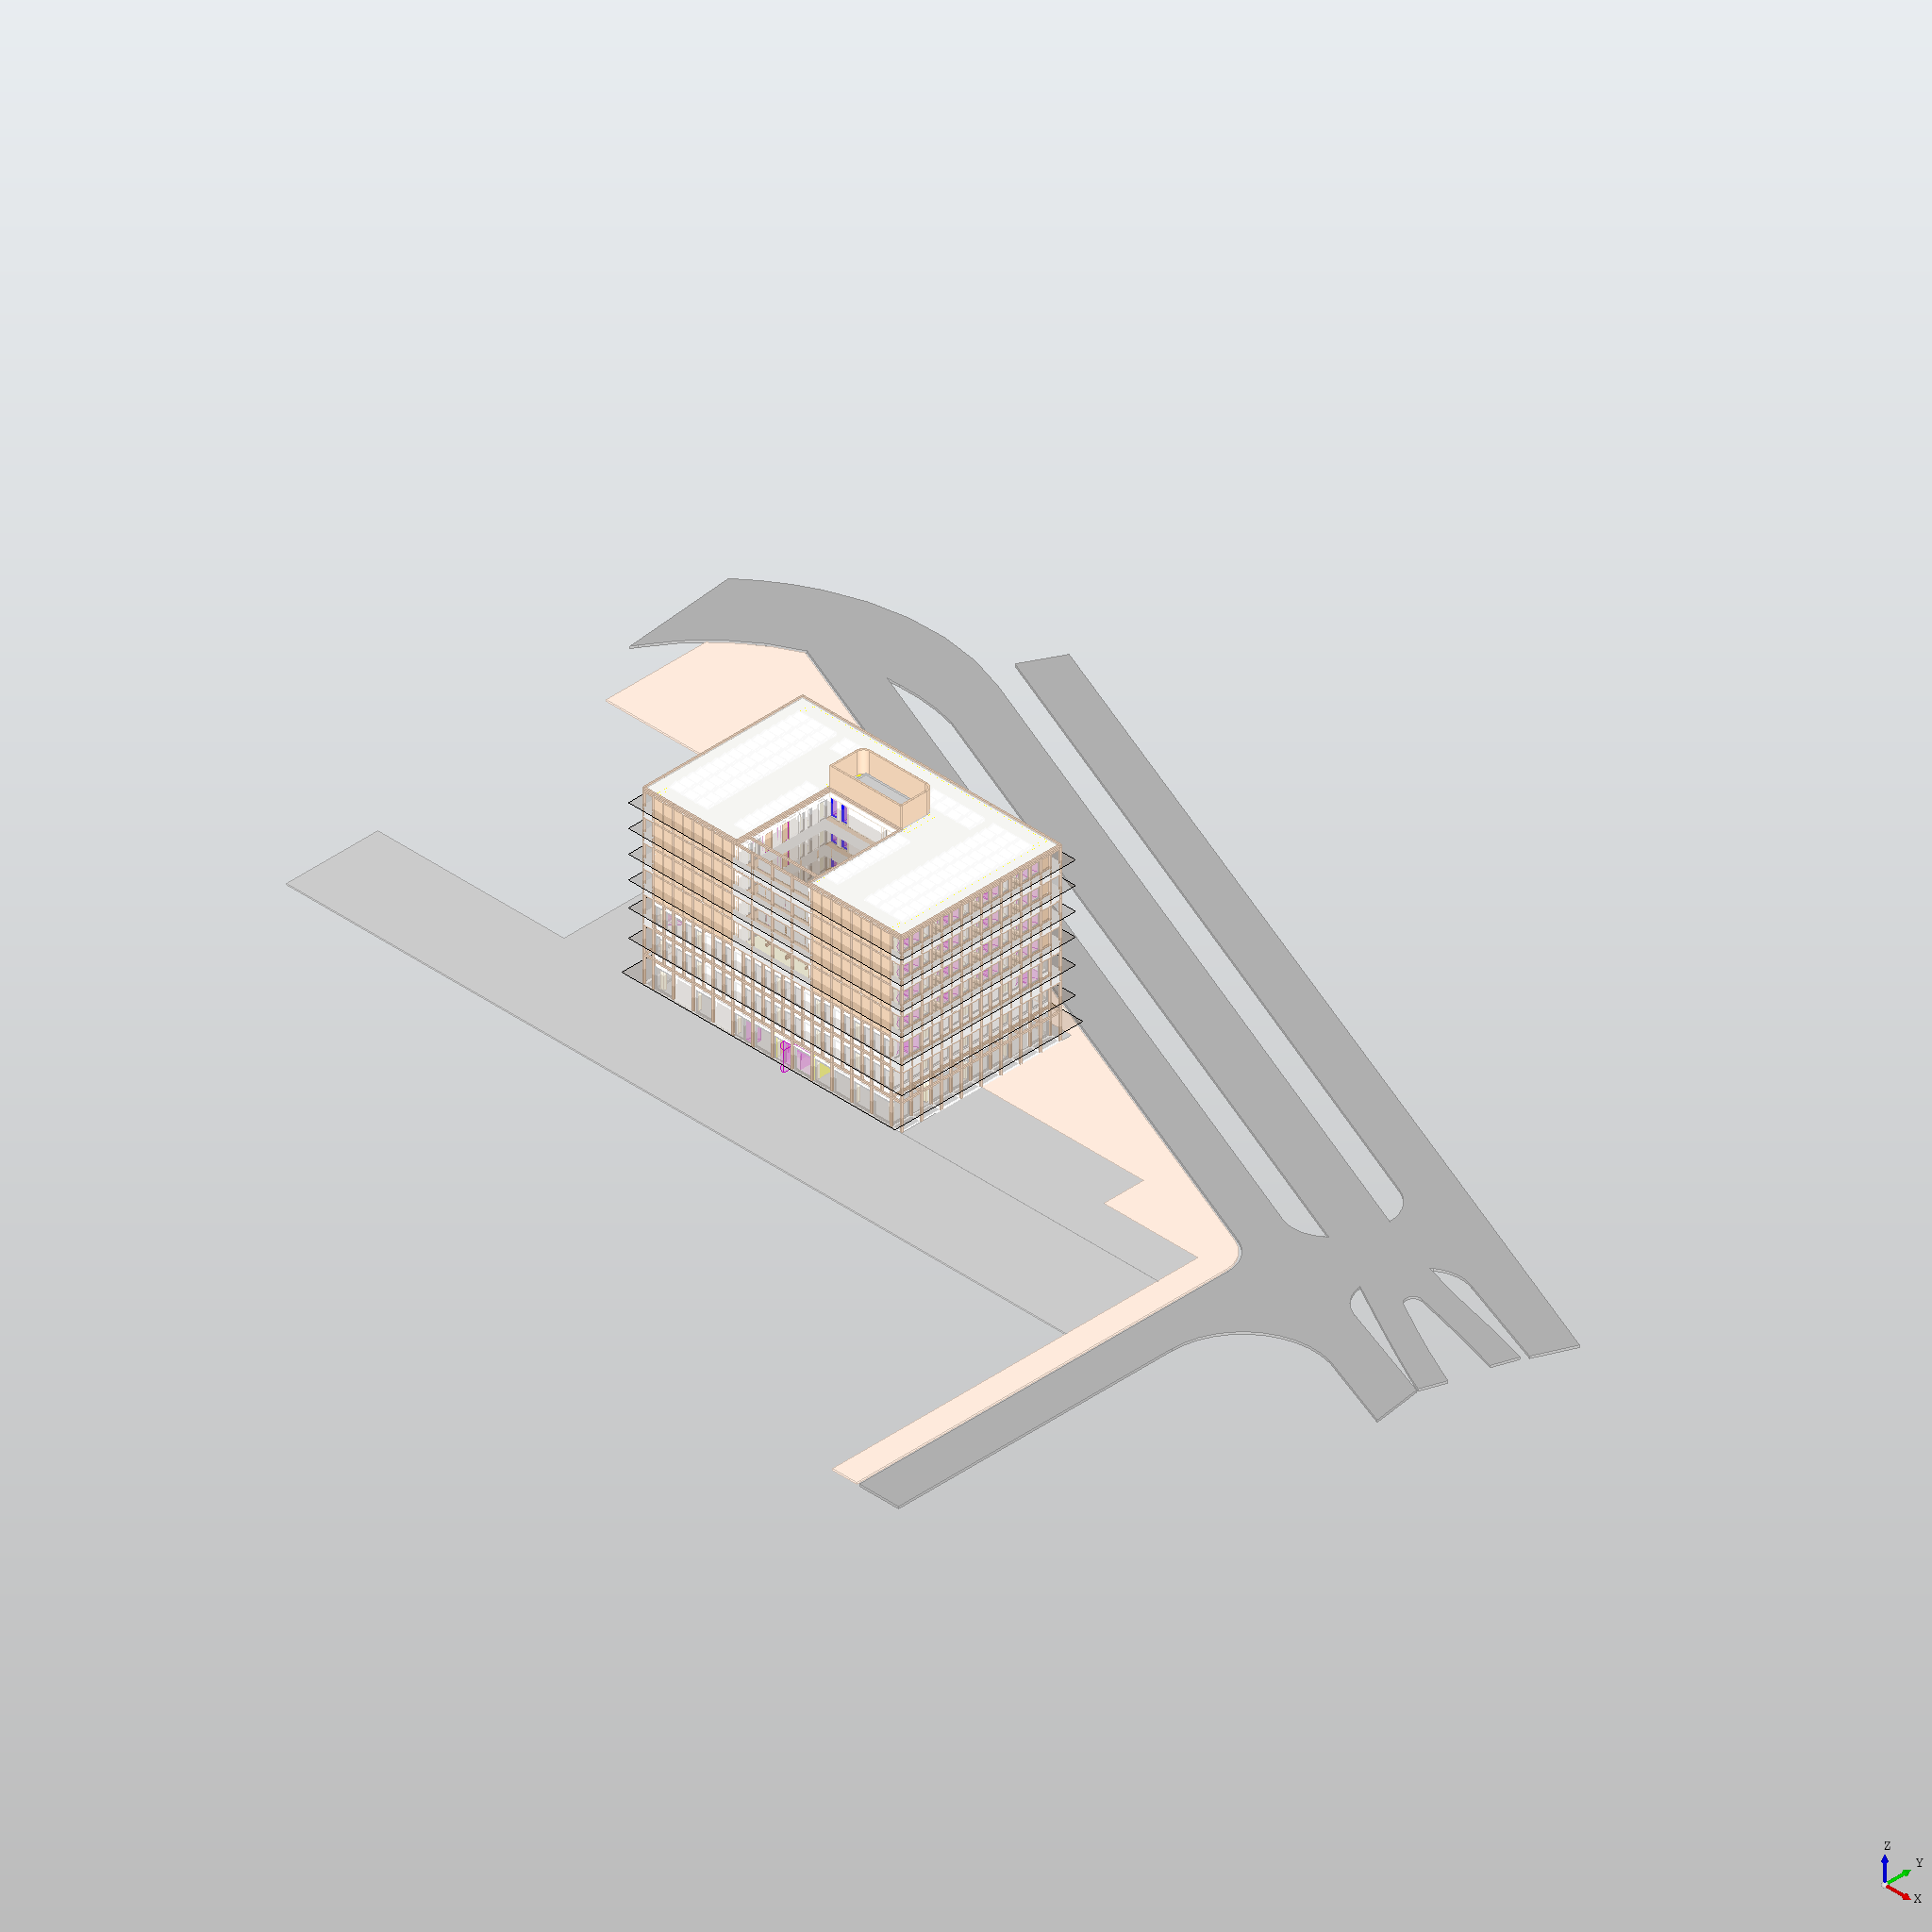 3D model of the building and the marked planes where the floor plans are extracted